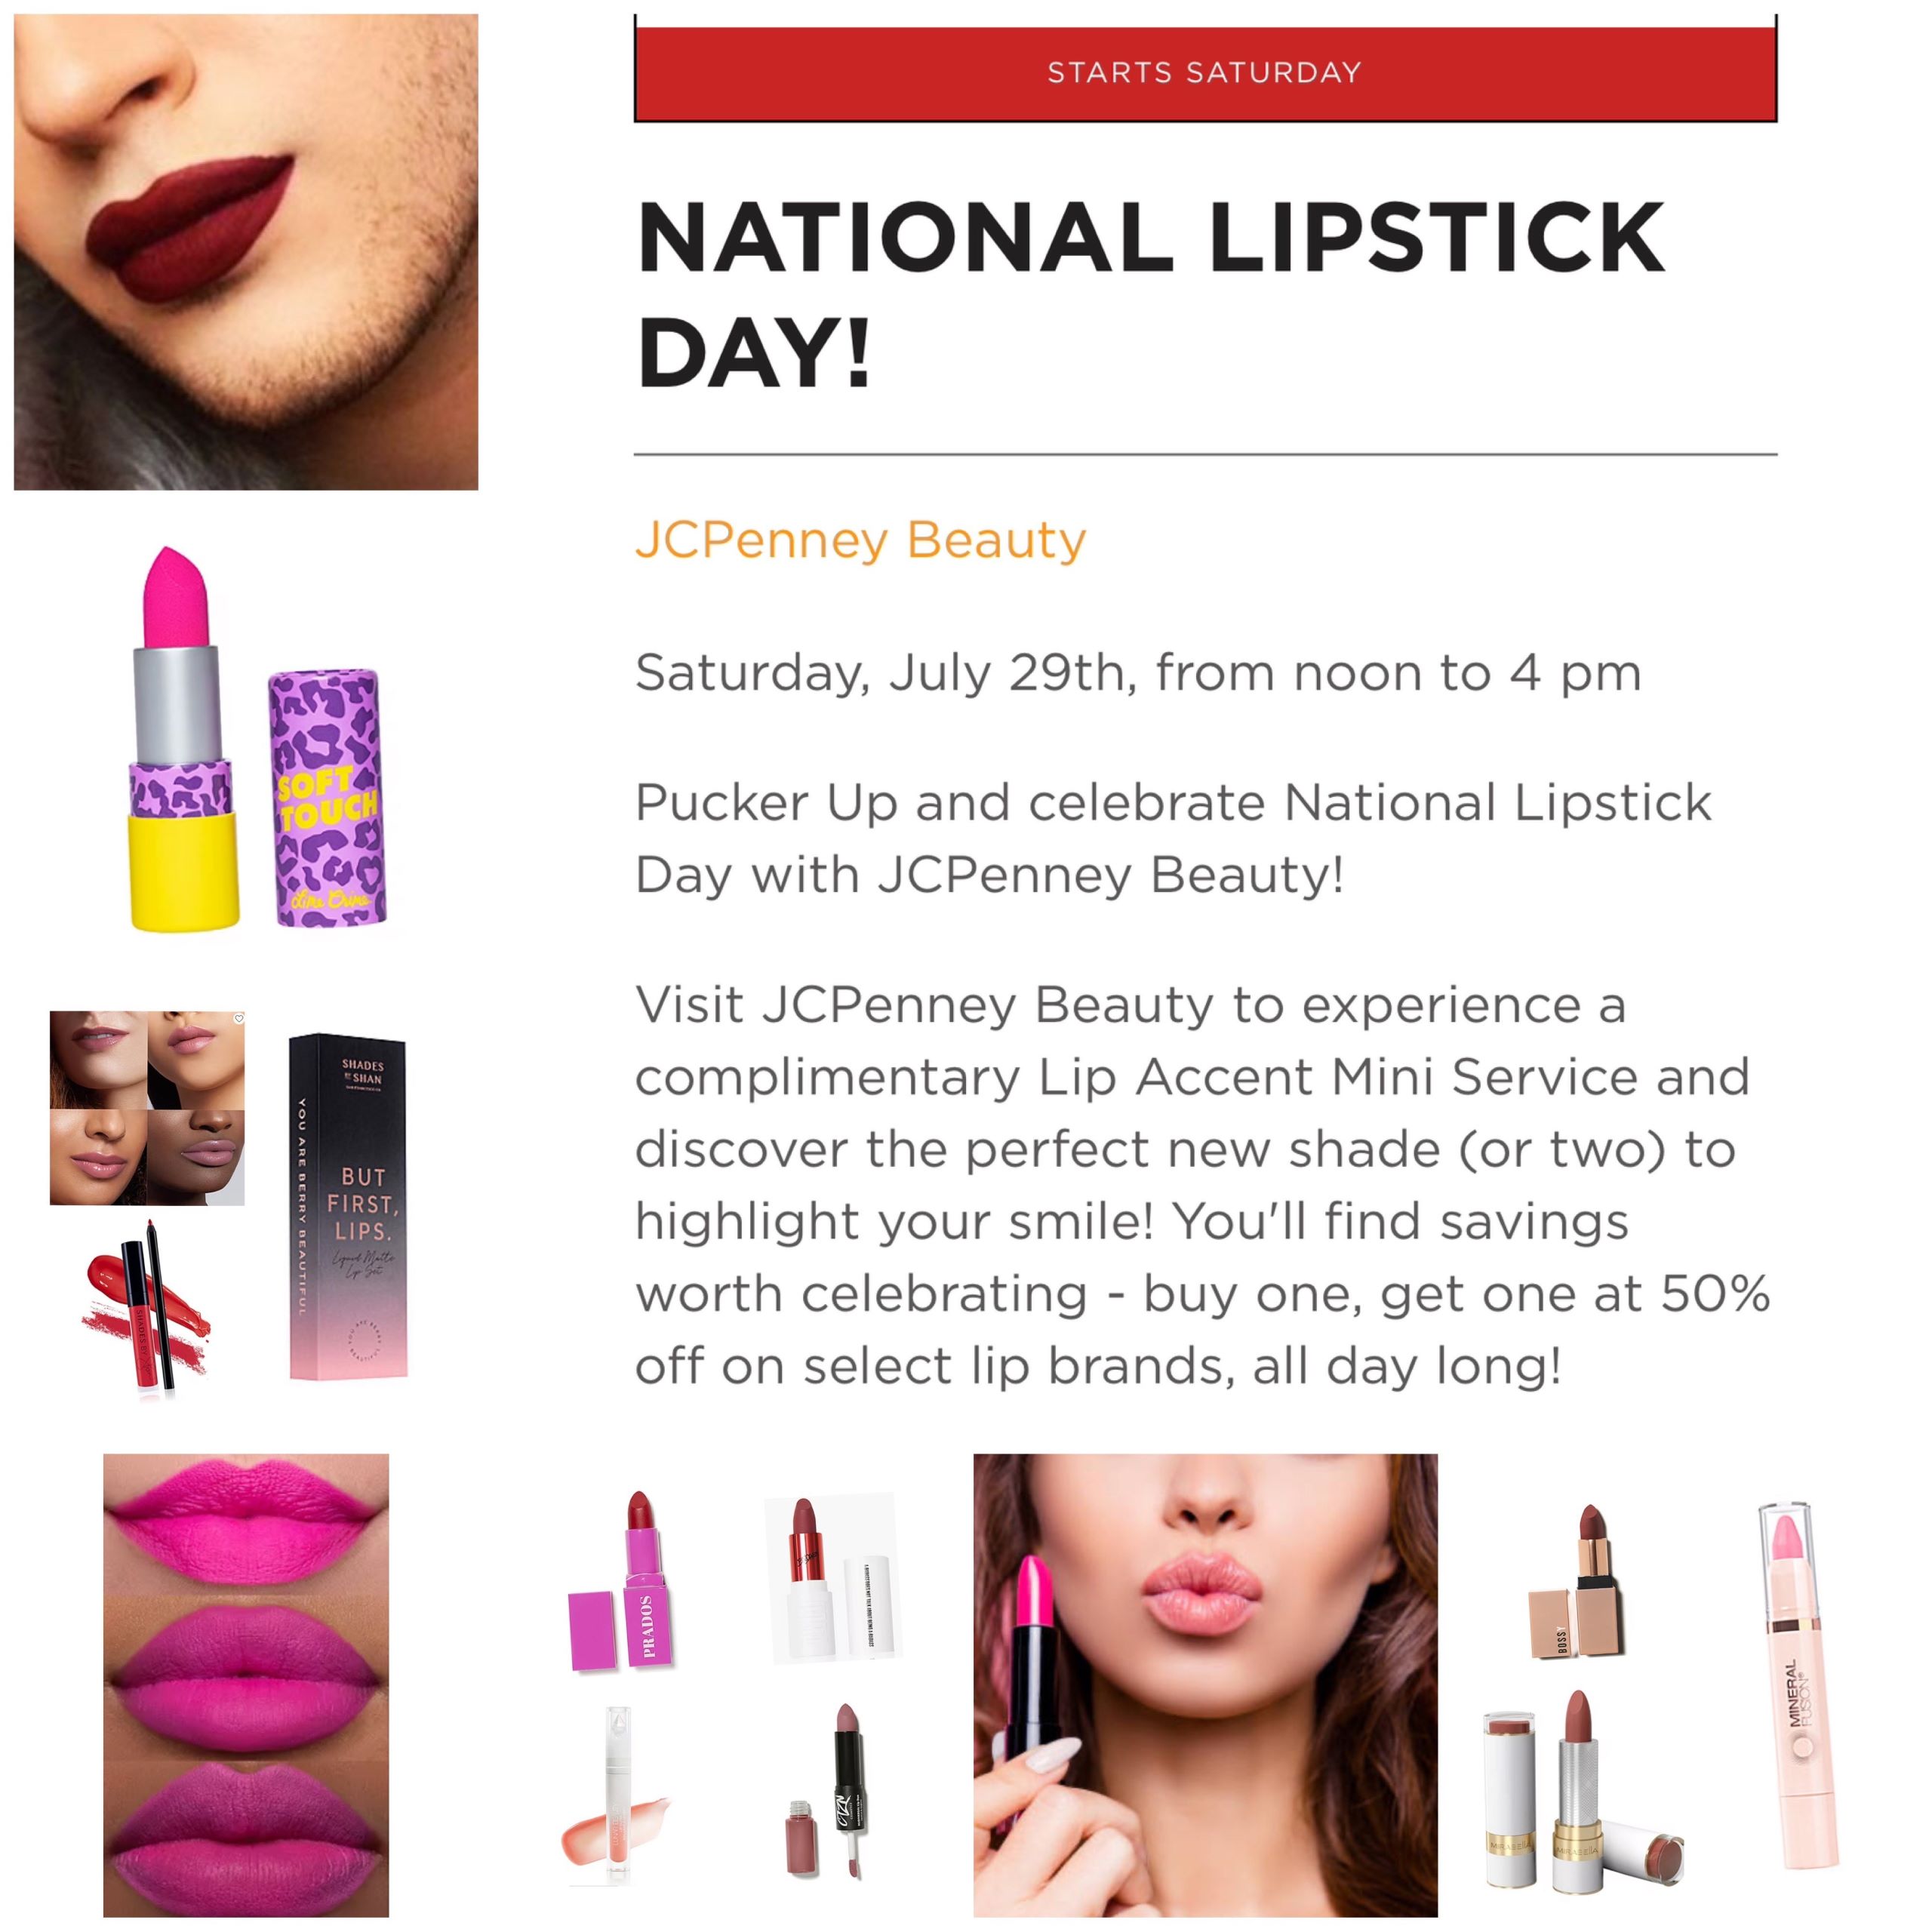 Visit JCPenny Beauty to experience a complimentary Lip Accent Mini Service and discover the perfect new shade (or two) to highlight your smile! You'll find savings worth celebrating - buy one, get one 50% off on select lip brands, all day long!